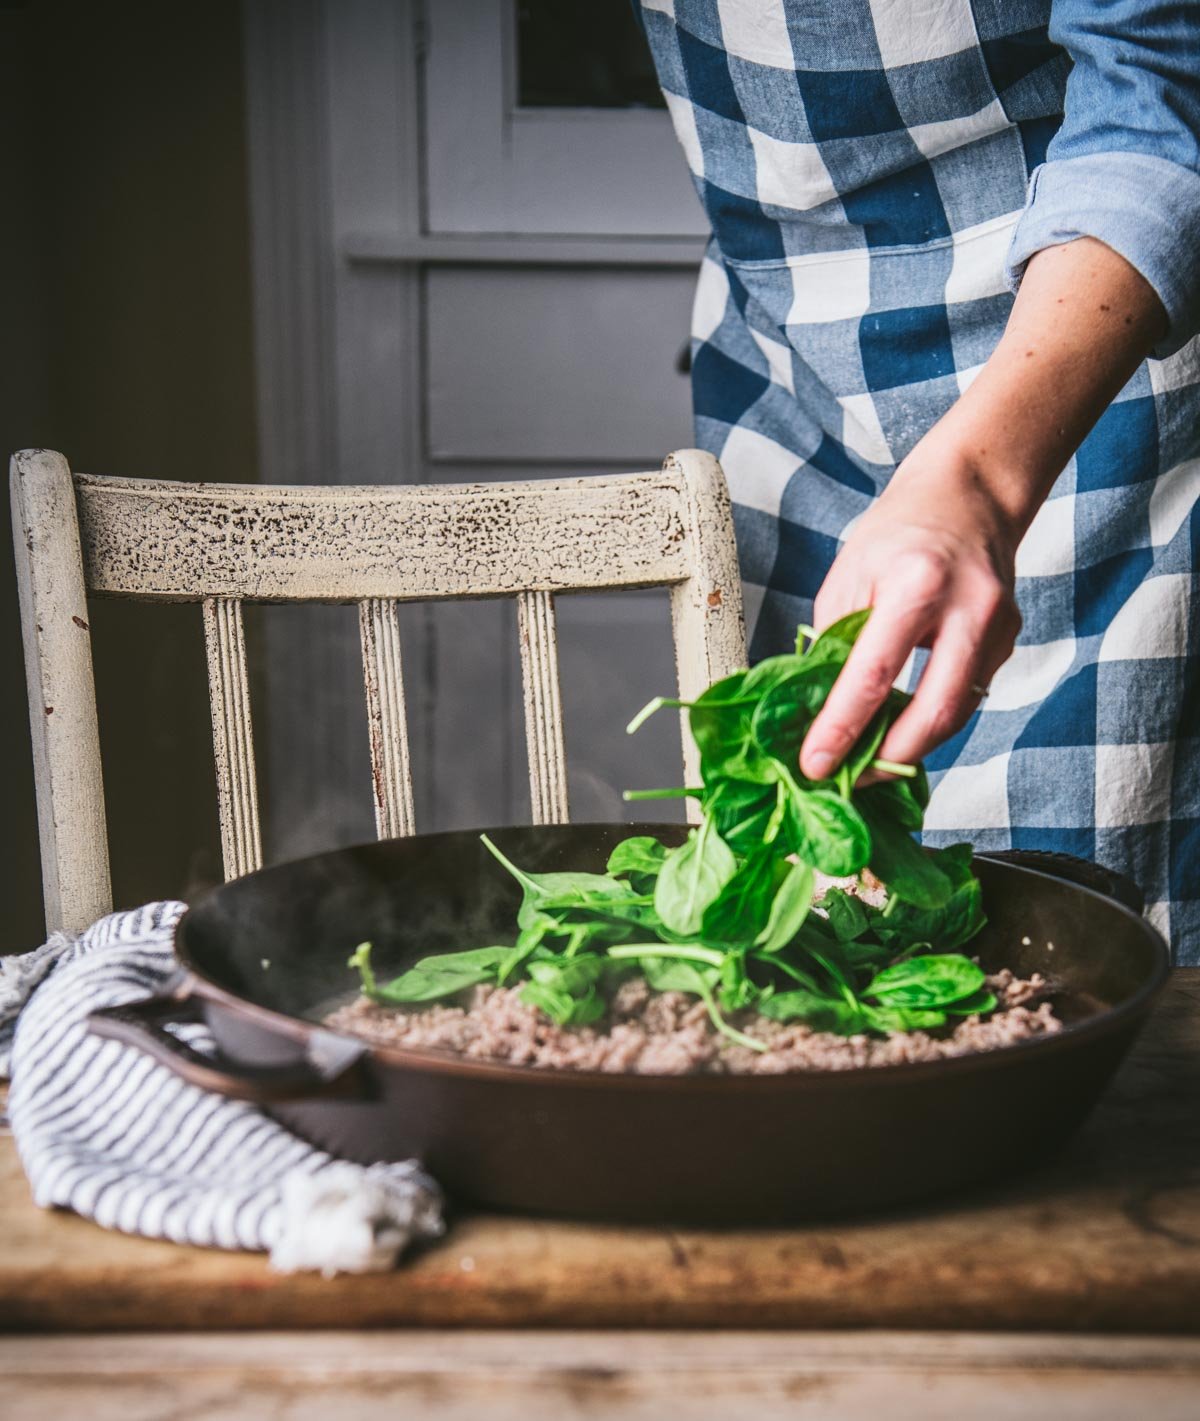 Adding spinach to skillet with Italian sausage